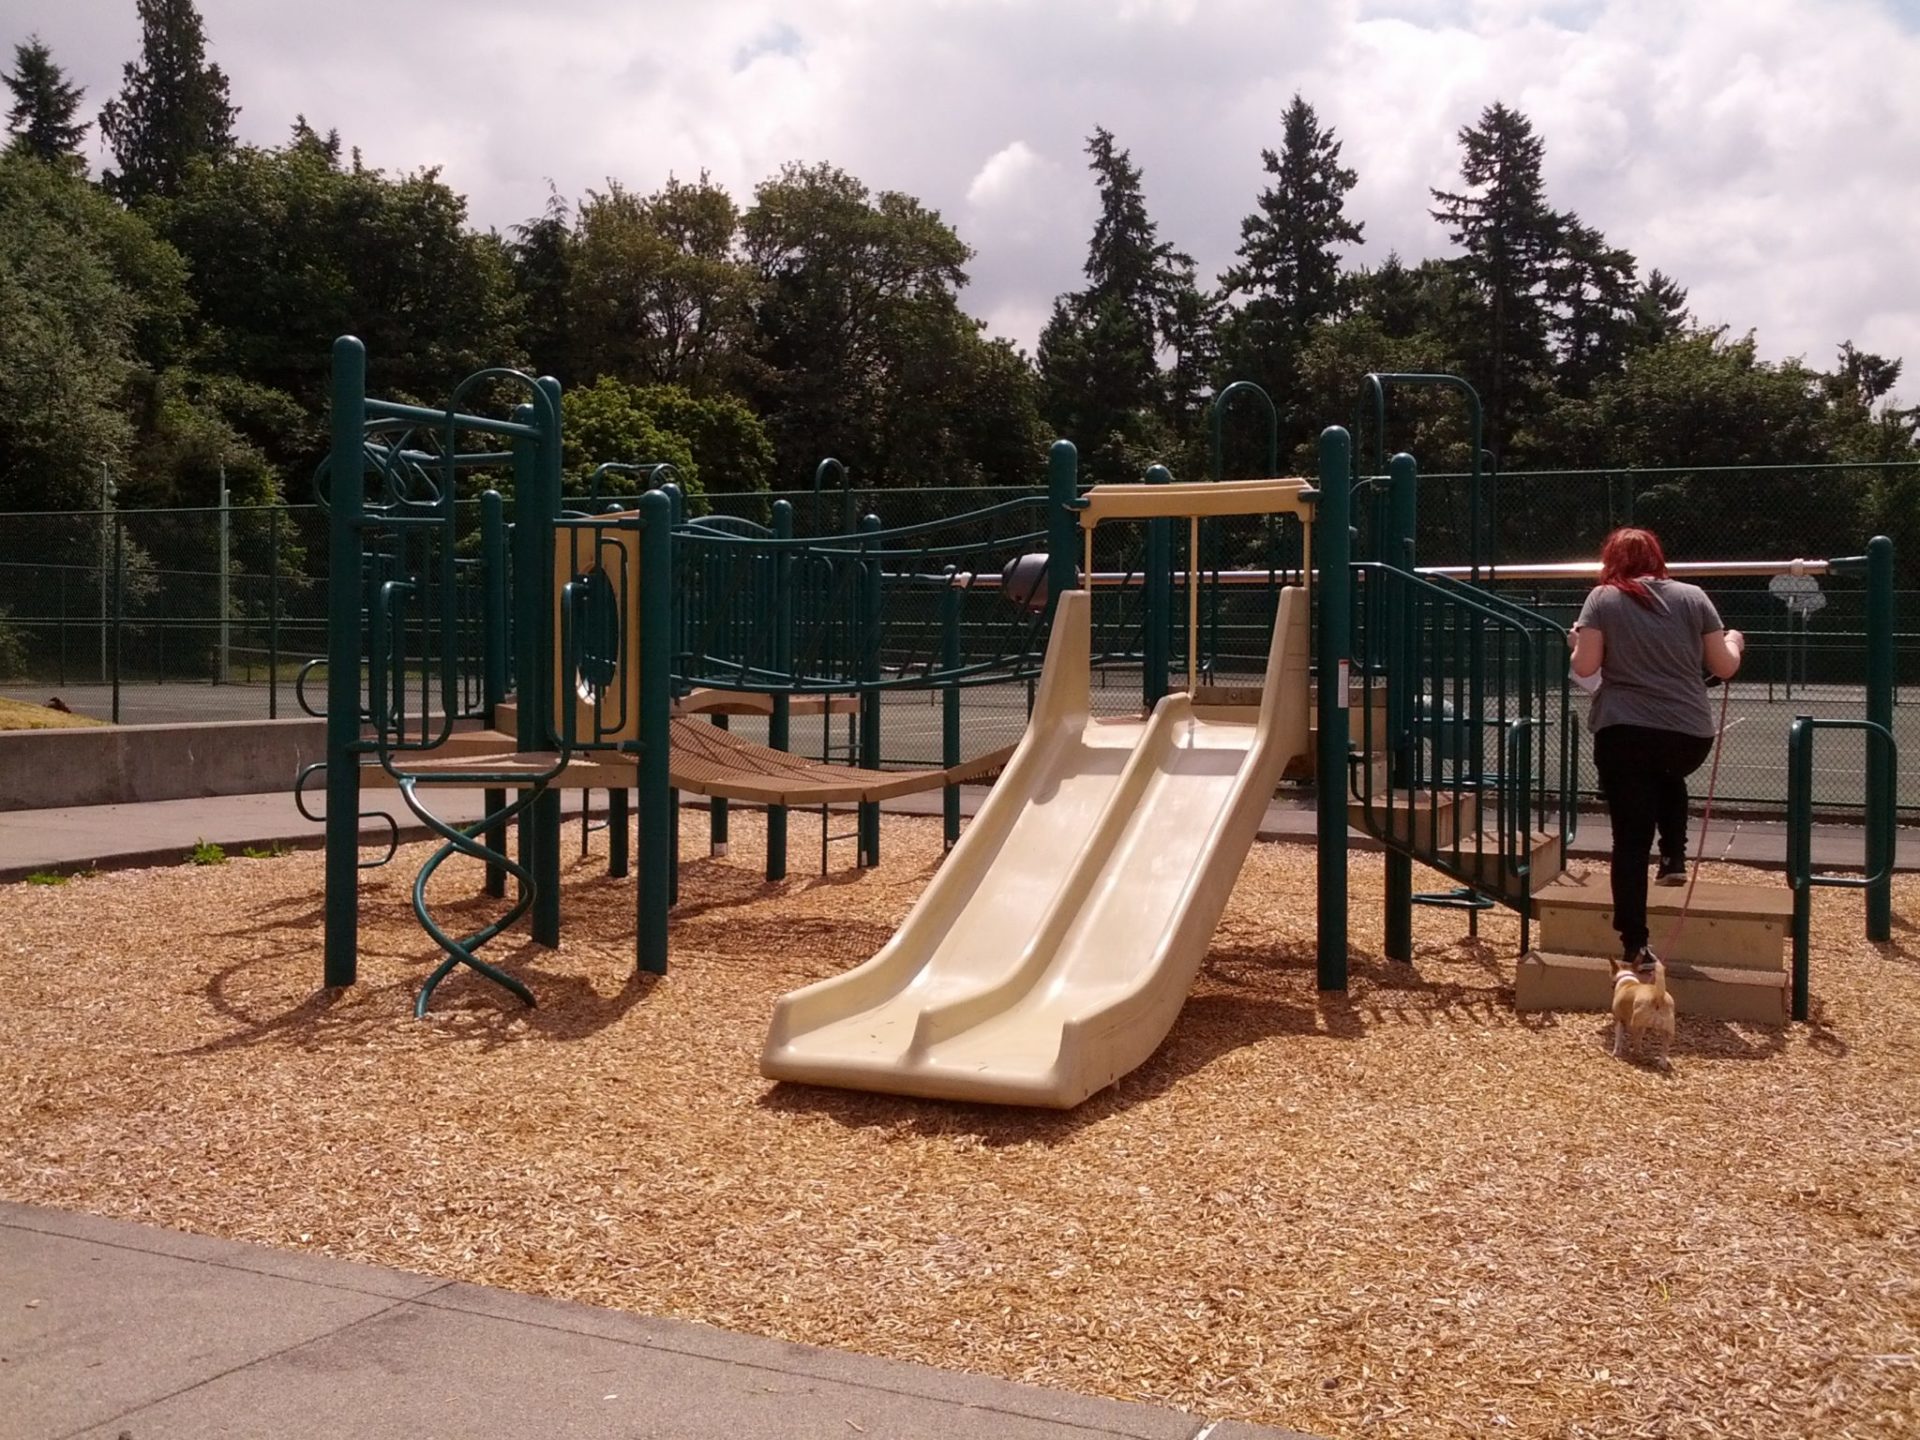 Kent Parks reopens playgrounds, skate parks, courts & more